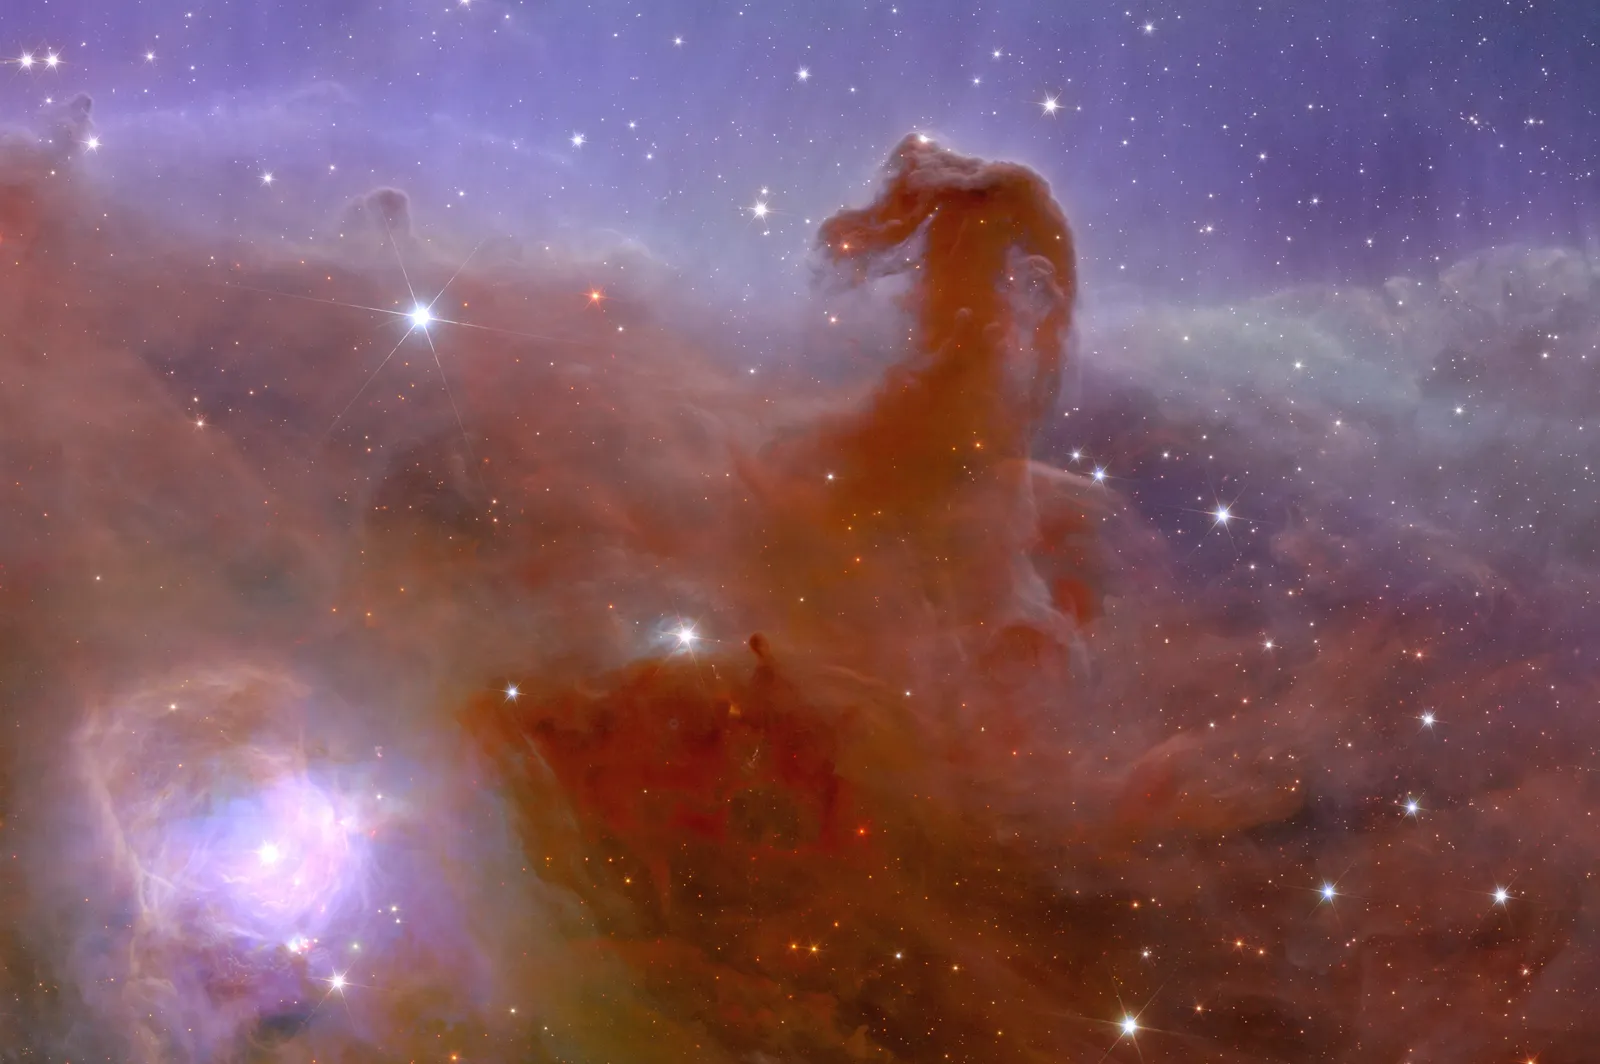 Horsehead Nebula: The "Euclid" probe was launched into space at the beginning of July